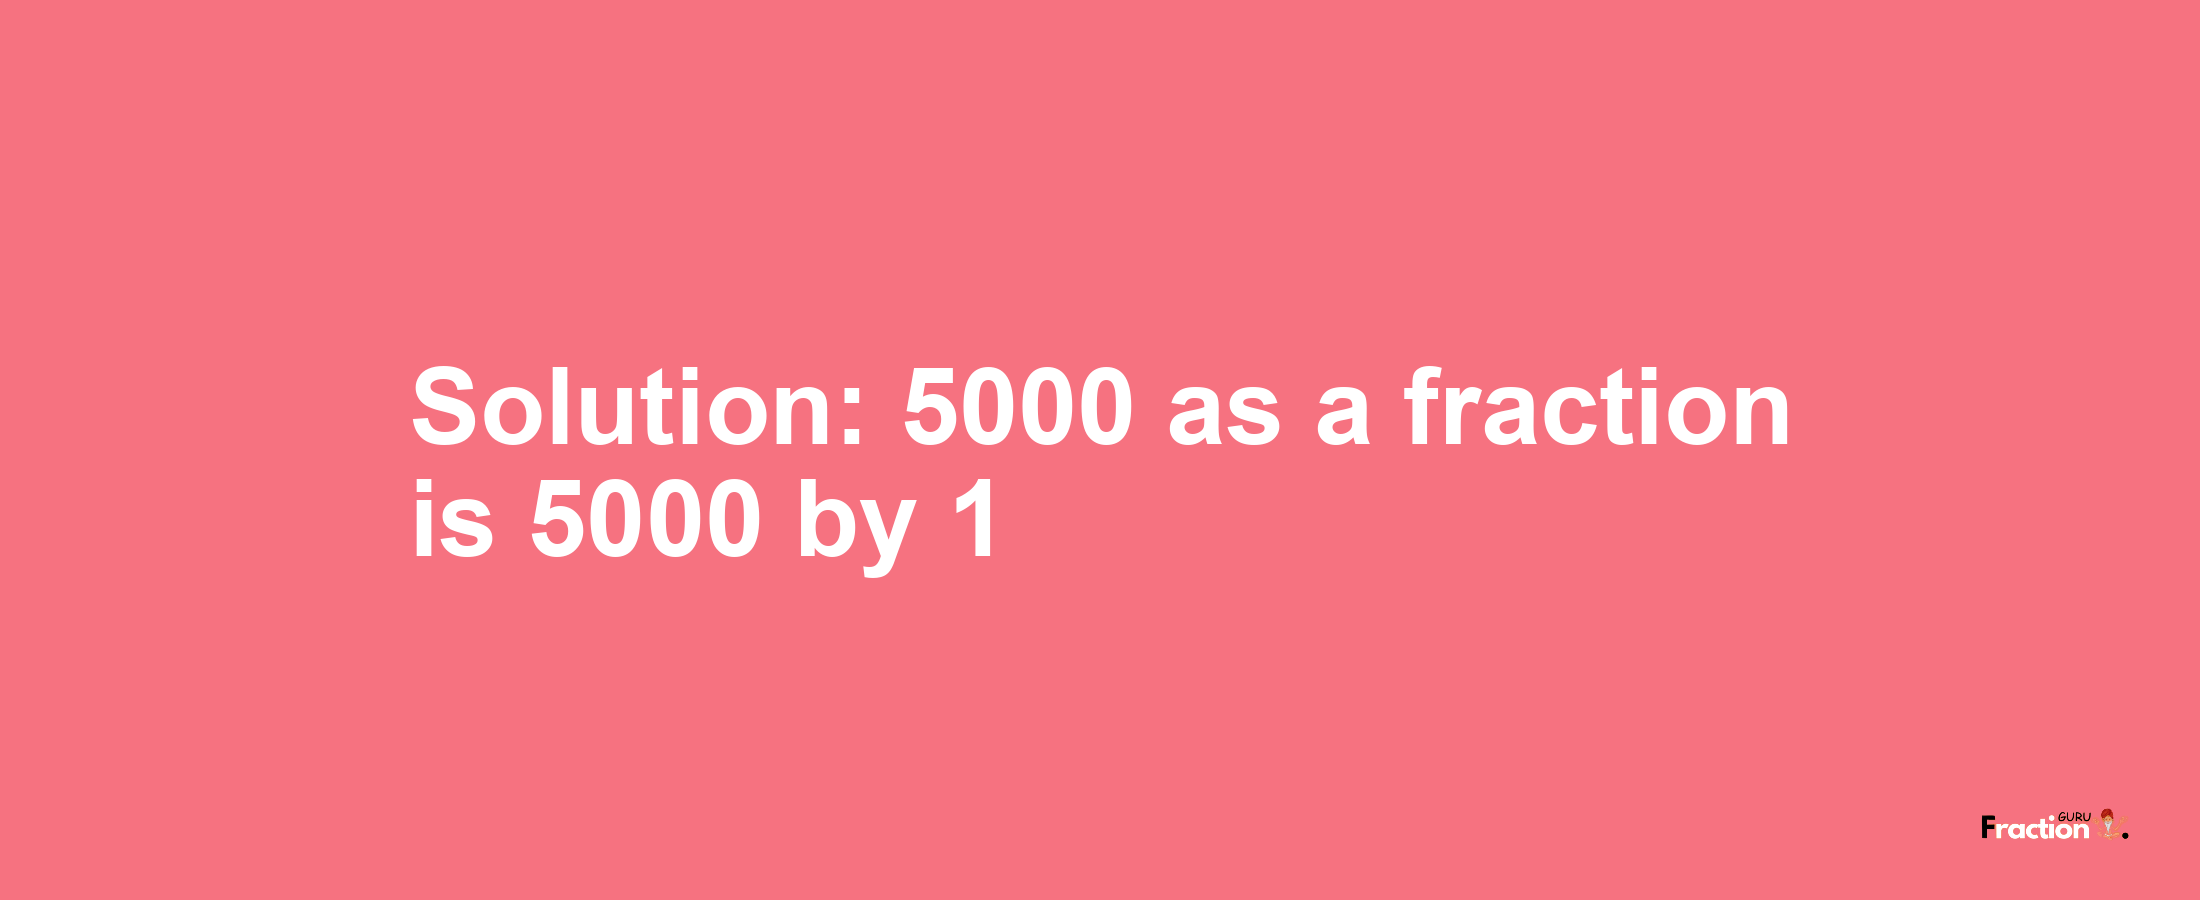 Solution:5000 as a fraction is 5000/1